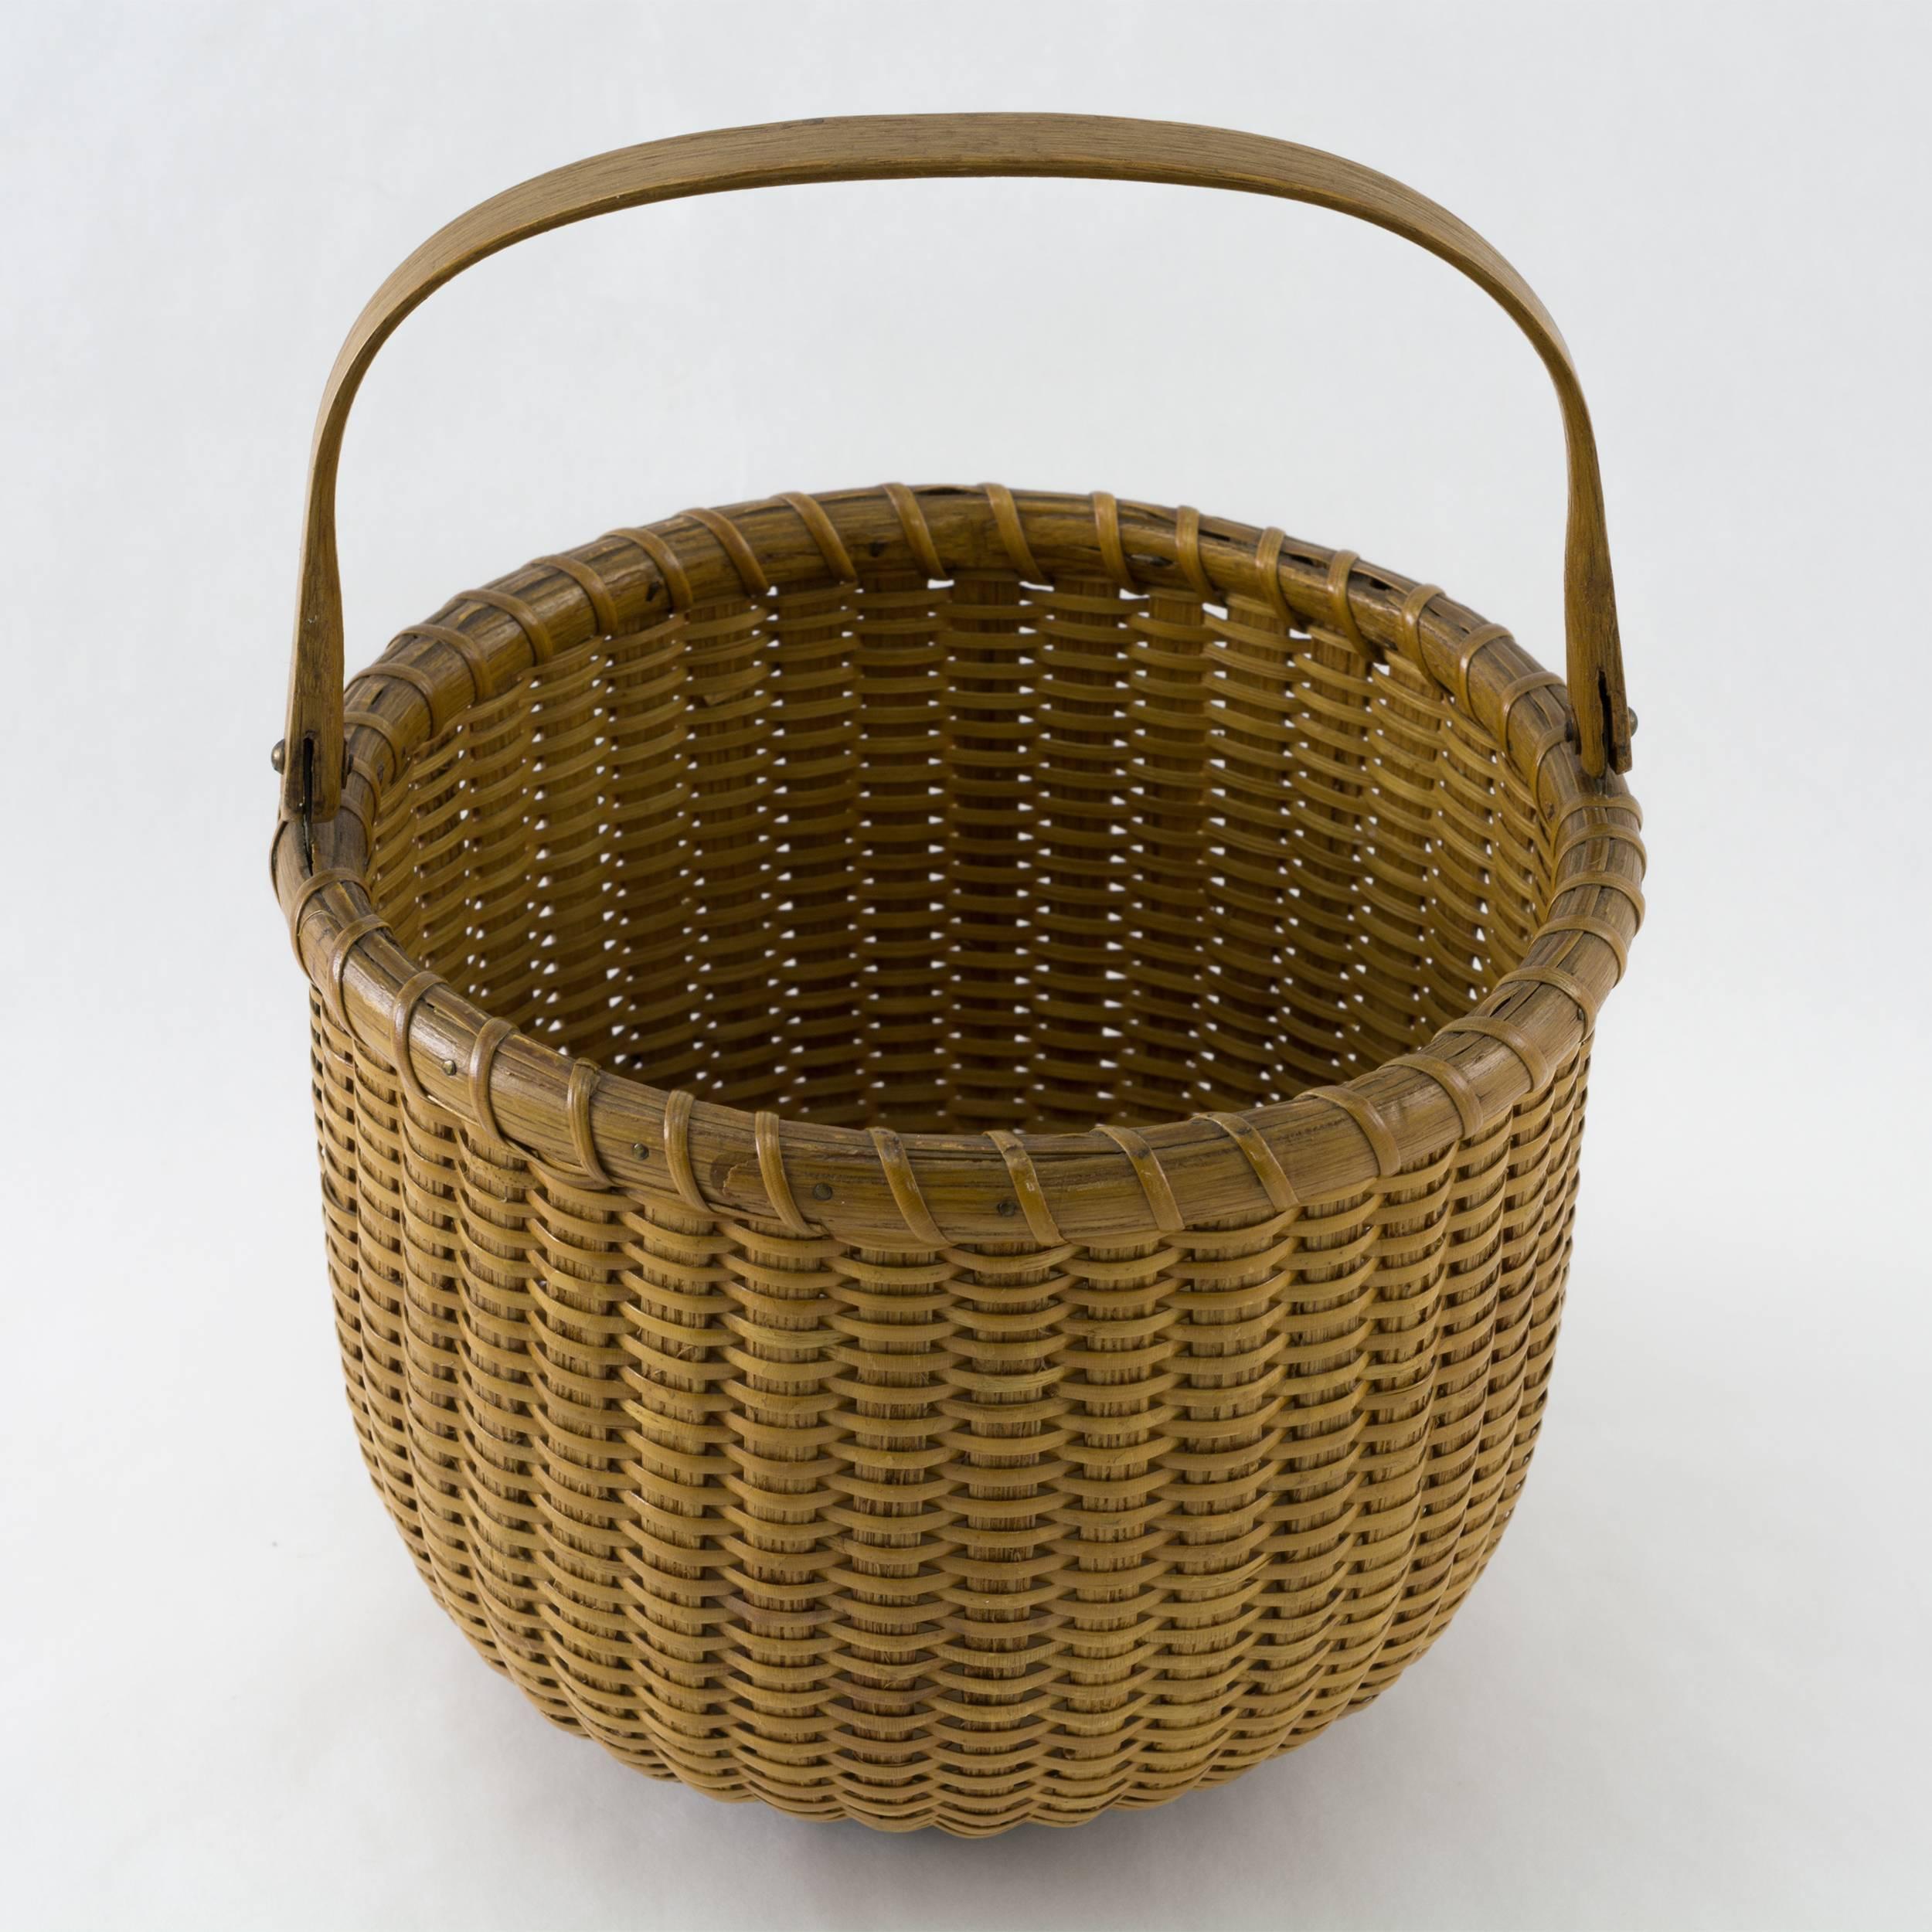 Open round basket with oak staves, handle and walnut bottom.
Pristine condition with original paper label reading
